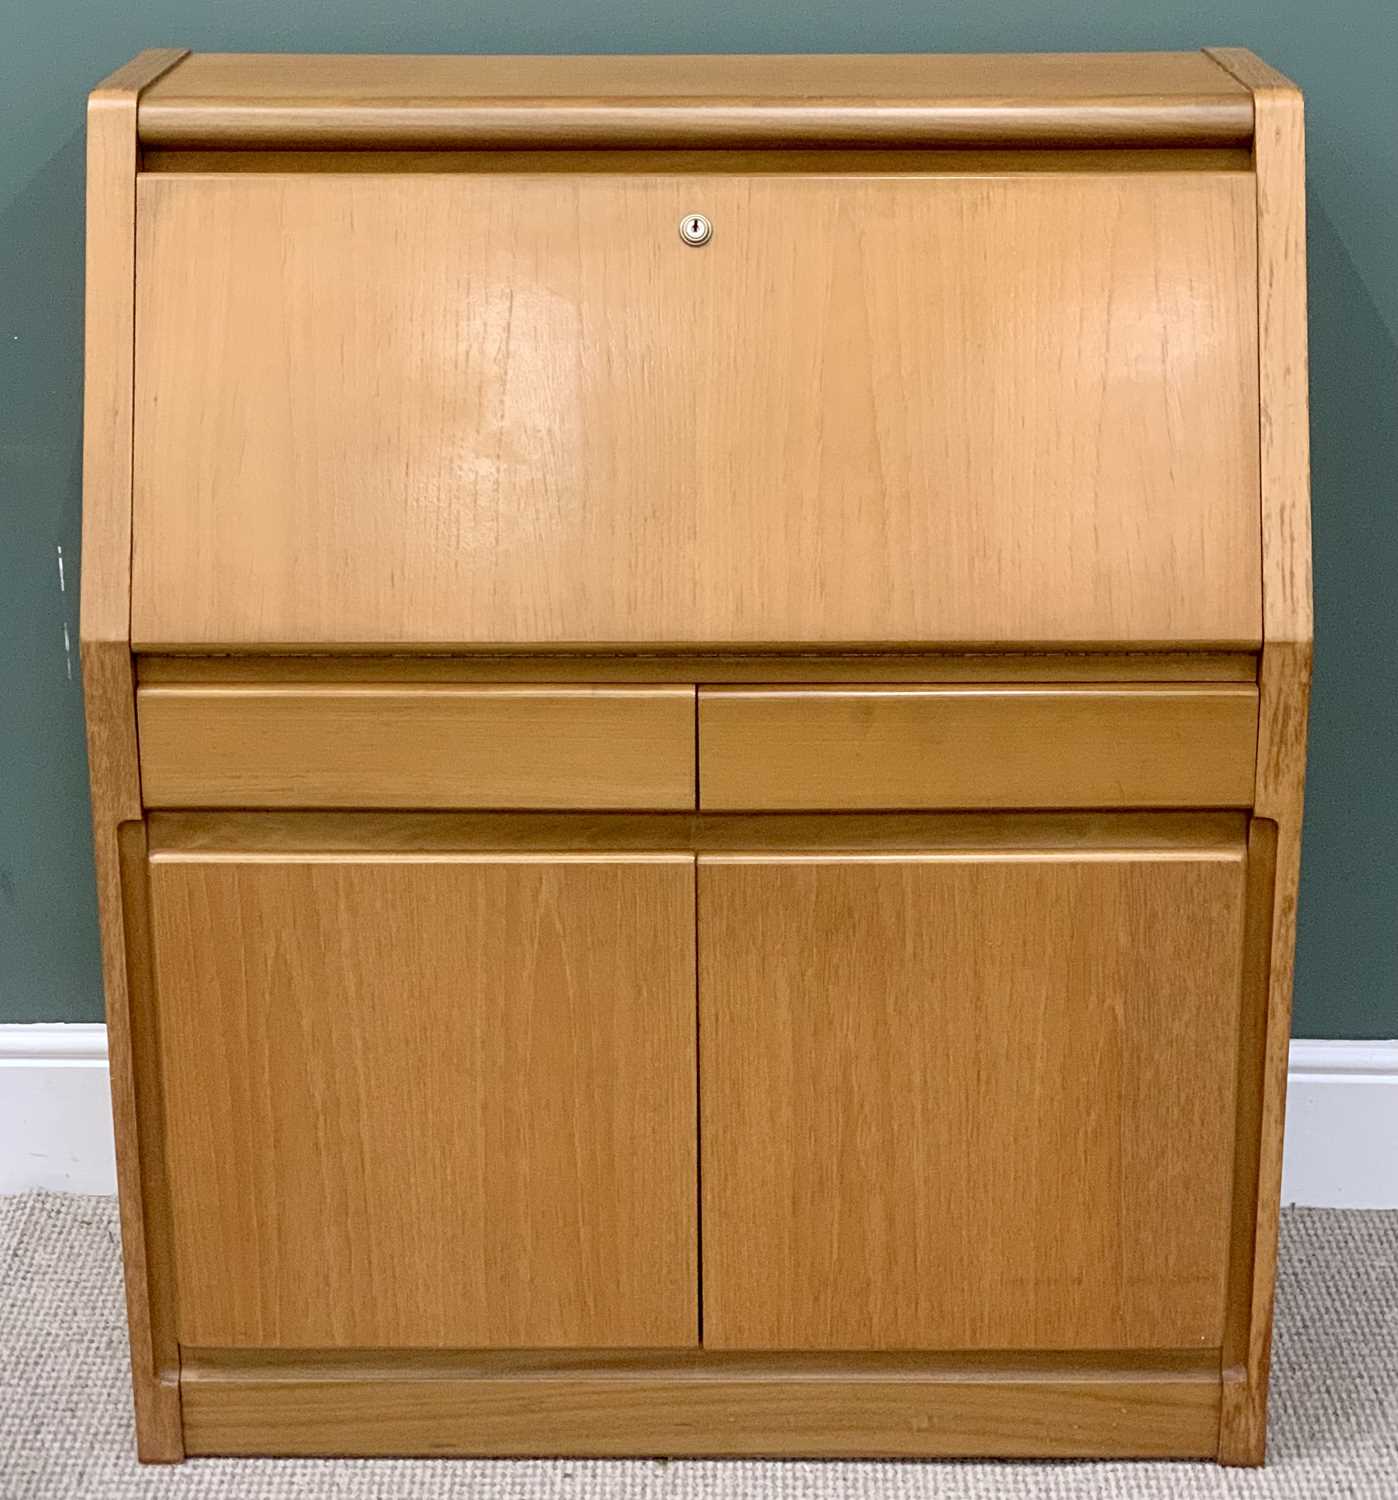 OFFERED WITH LOT 22 - MID-CENTURY TYPE BUREAU BY REMPLOY - the drop down upper section having a